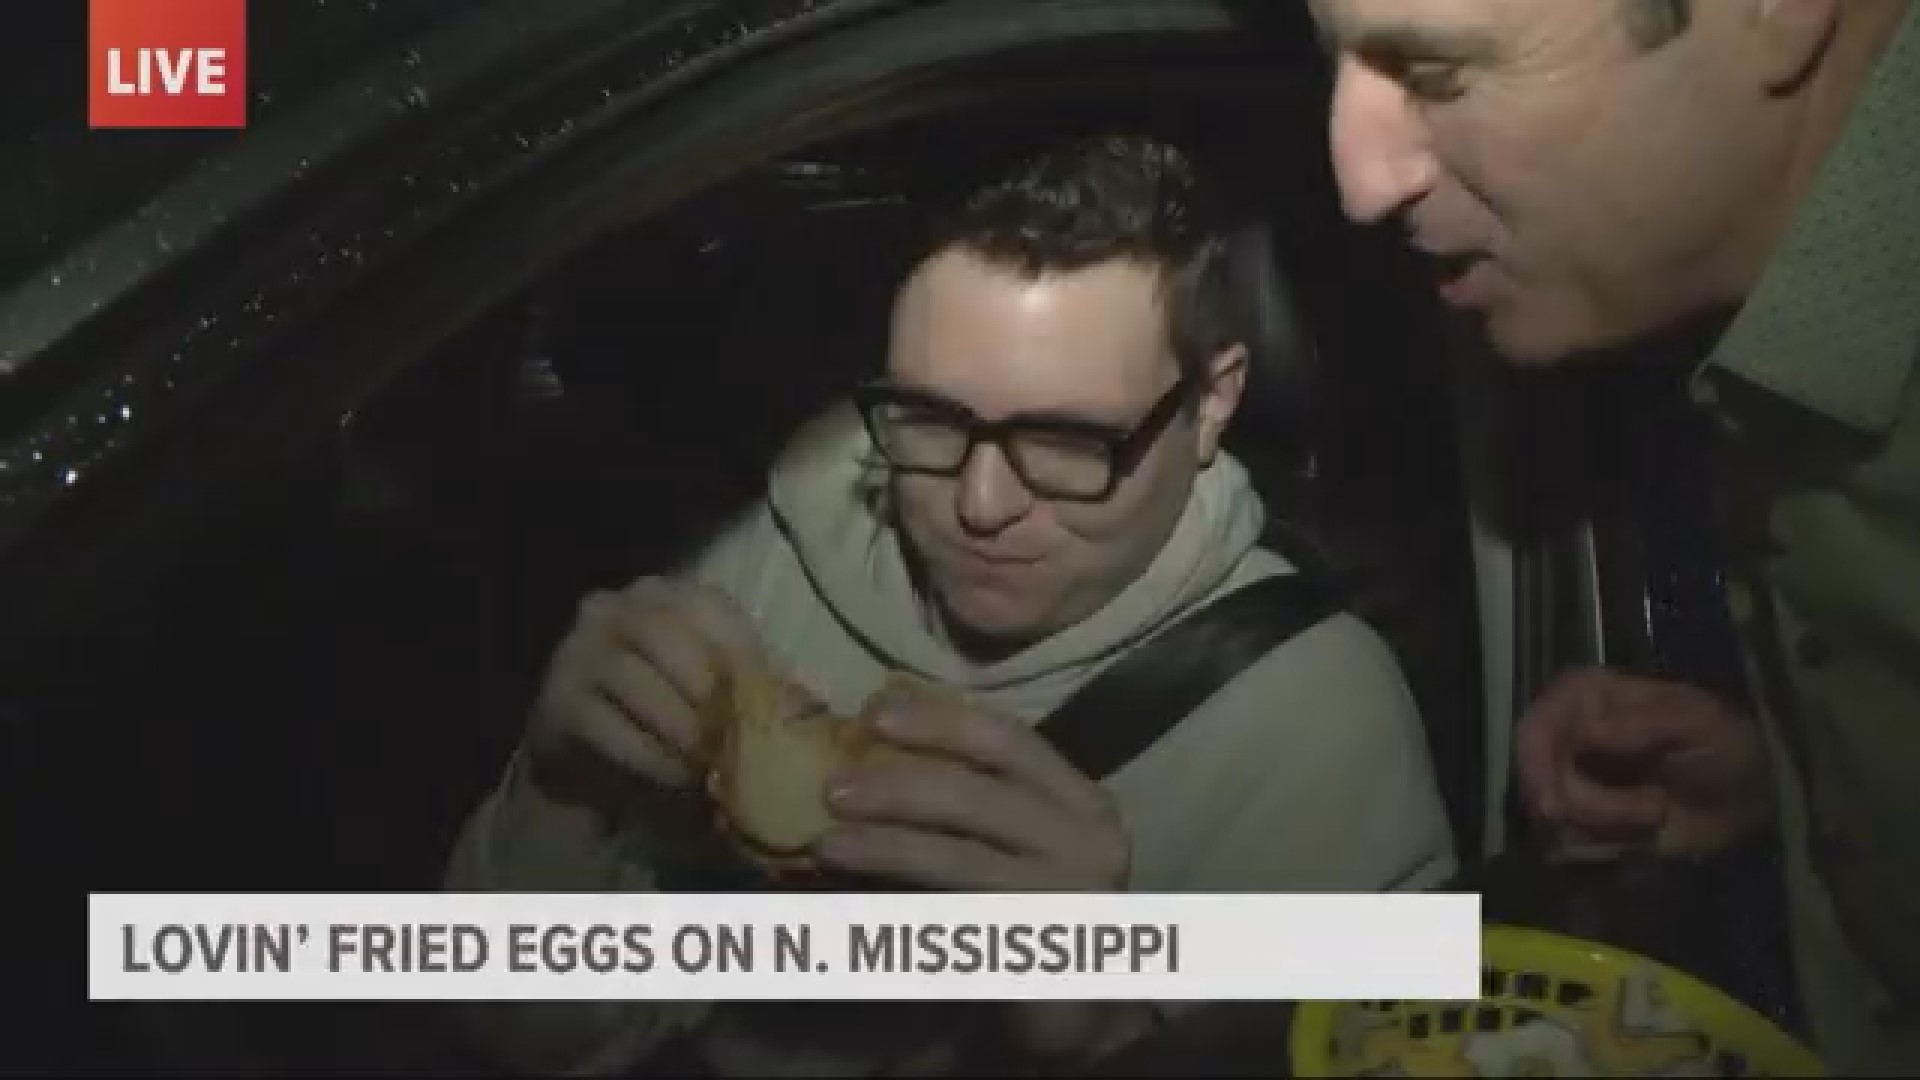 Drew Carney spends the morning at the new location of Fried Egg I'm In Love on N. Mississippi Ave. He shares the tasty sandwich with an unsuspecting driver!